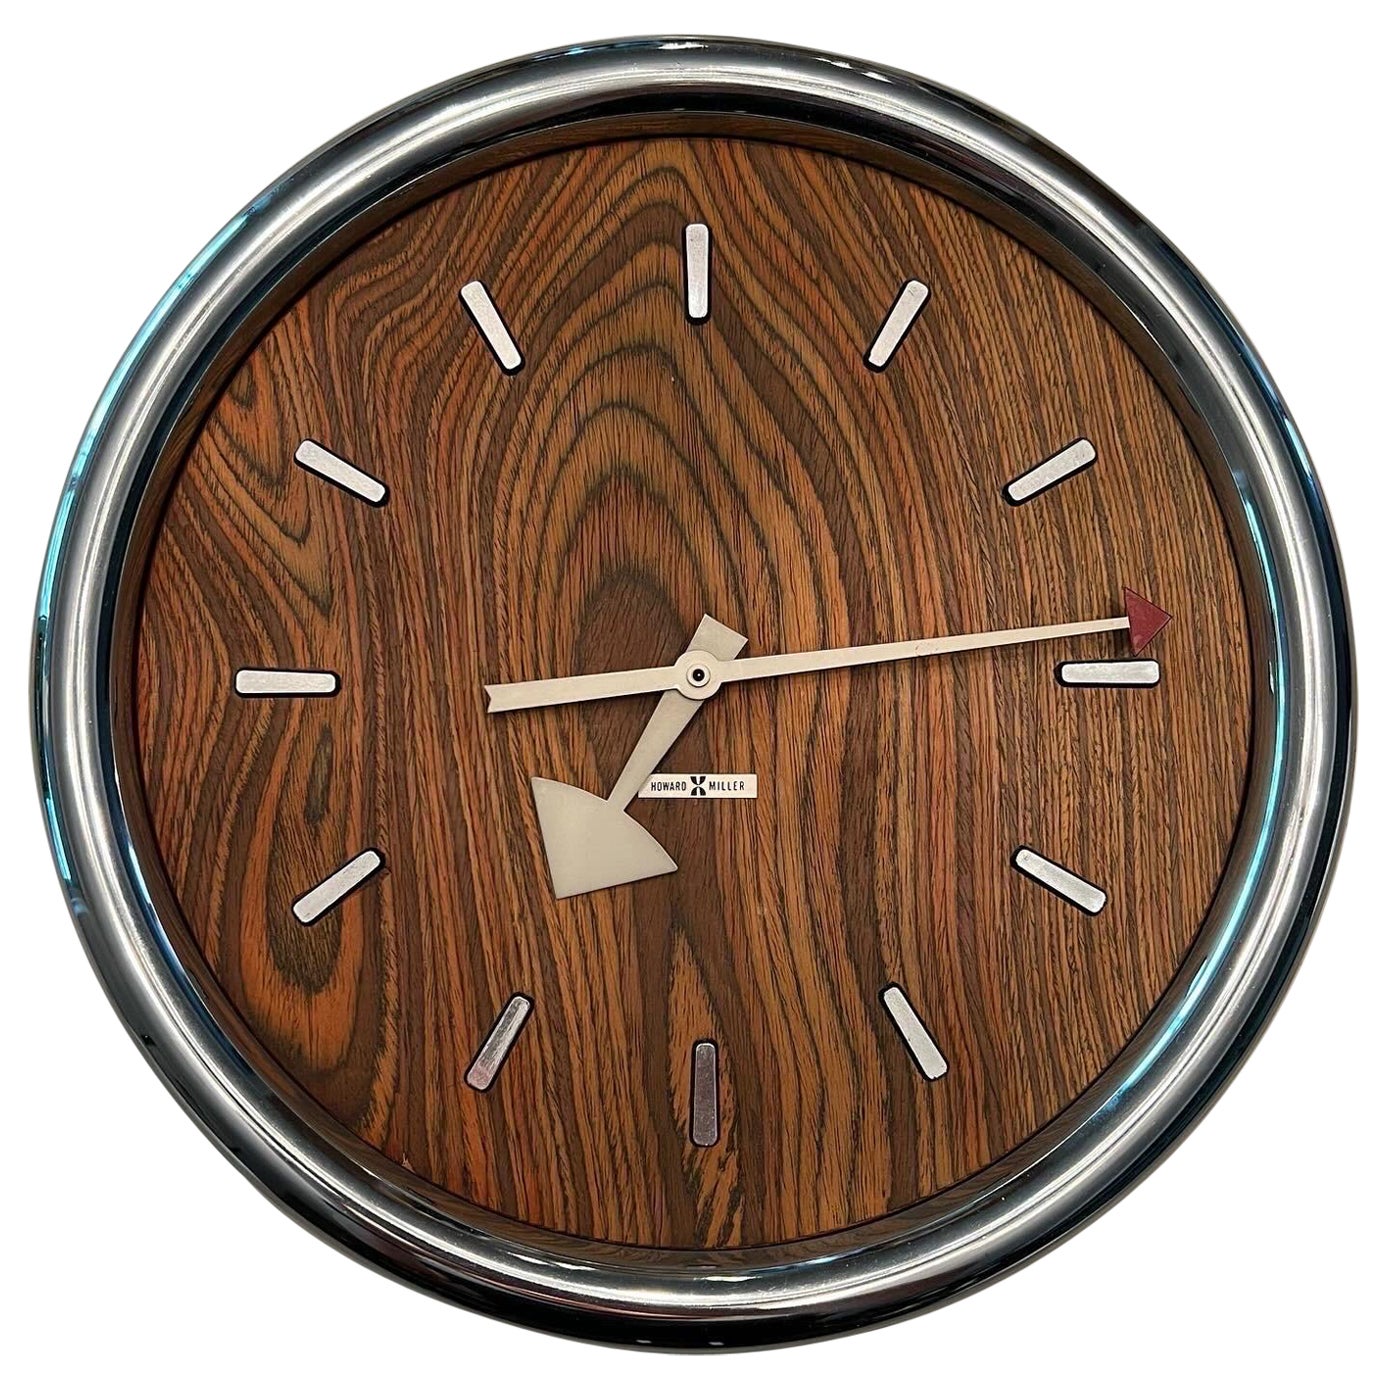 1970s Howard Miller zebrawood and chrome wall clock designed by Arthur Umanoff